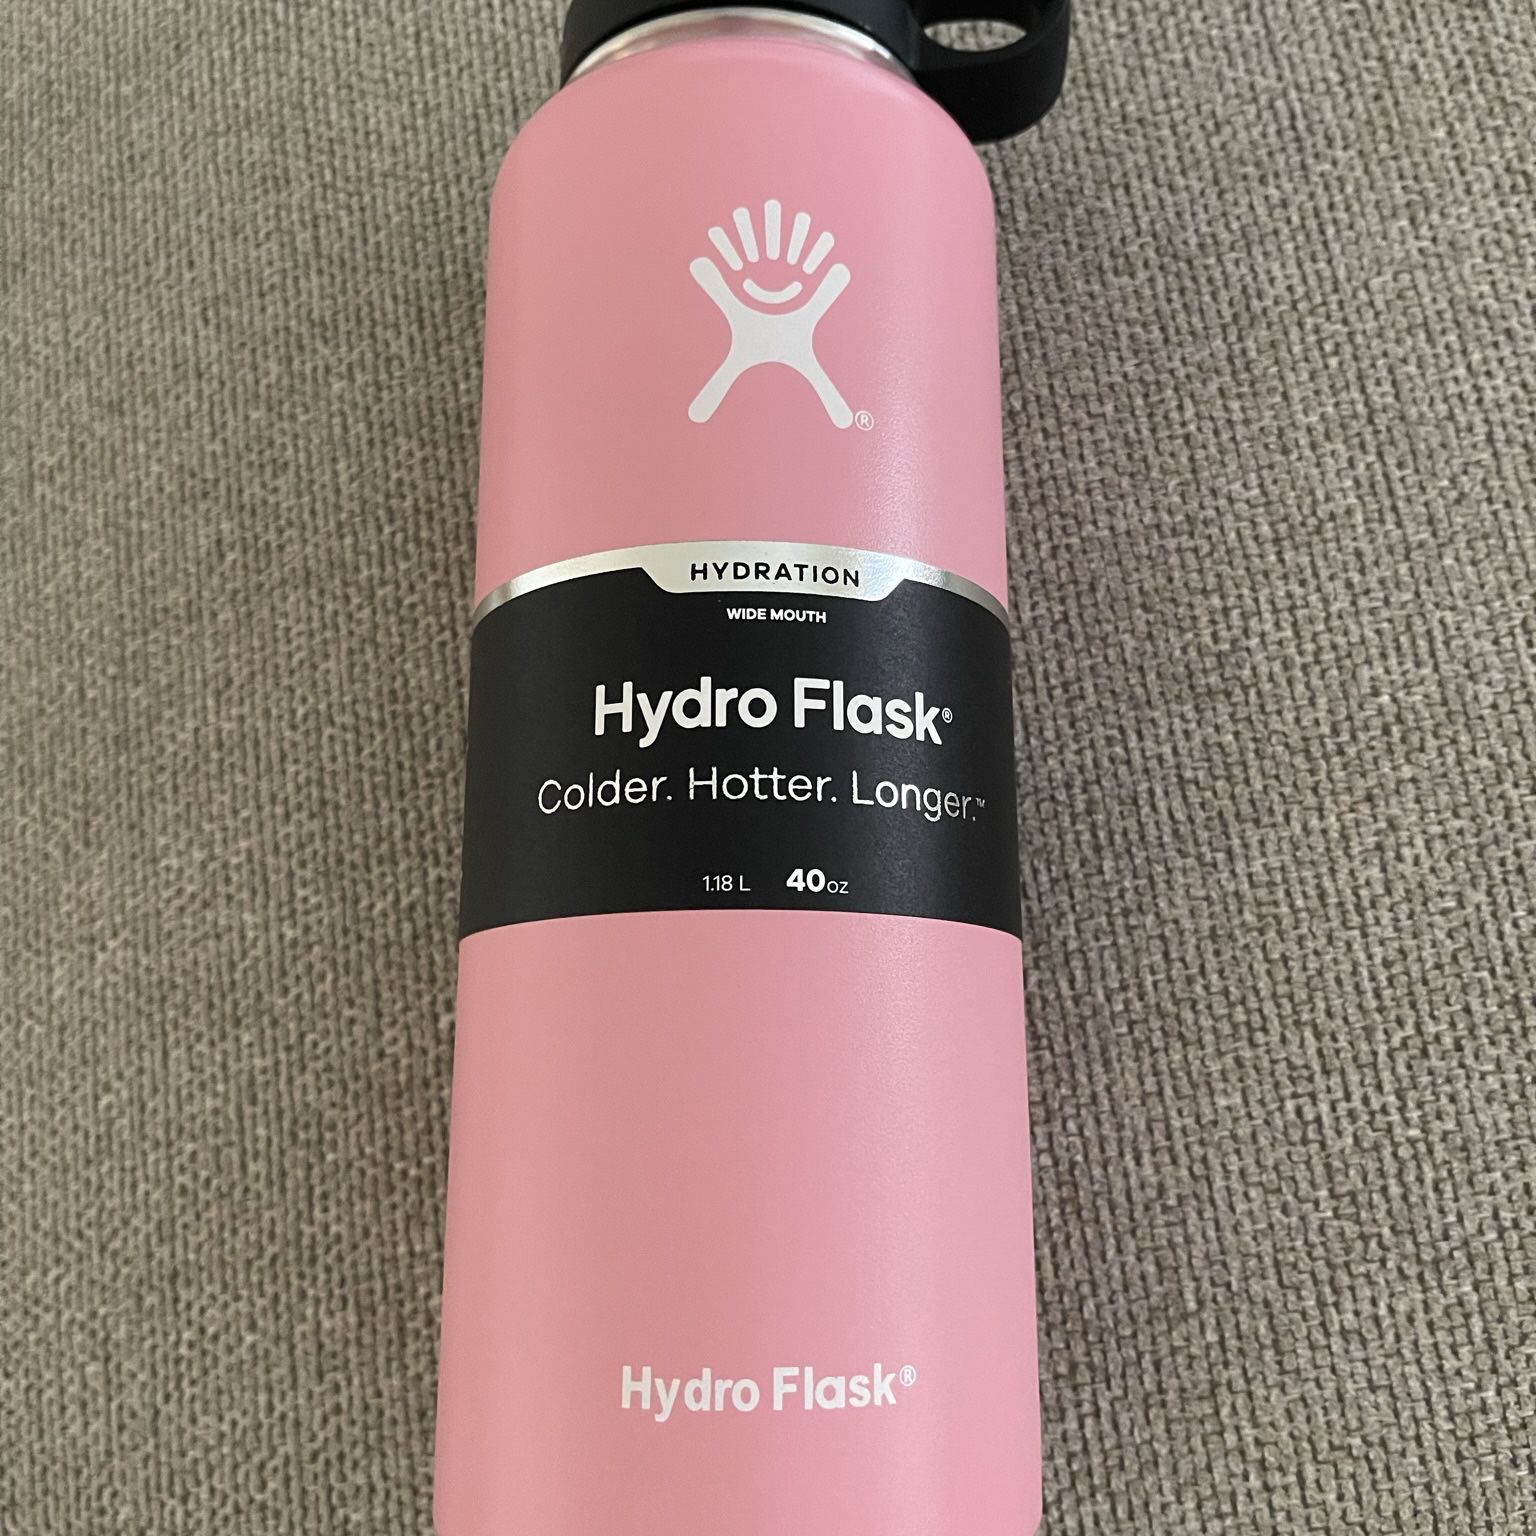 Hydro flask Special Edition for Sale in Culver City, CA - OfferUp